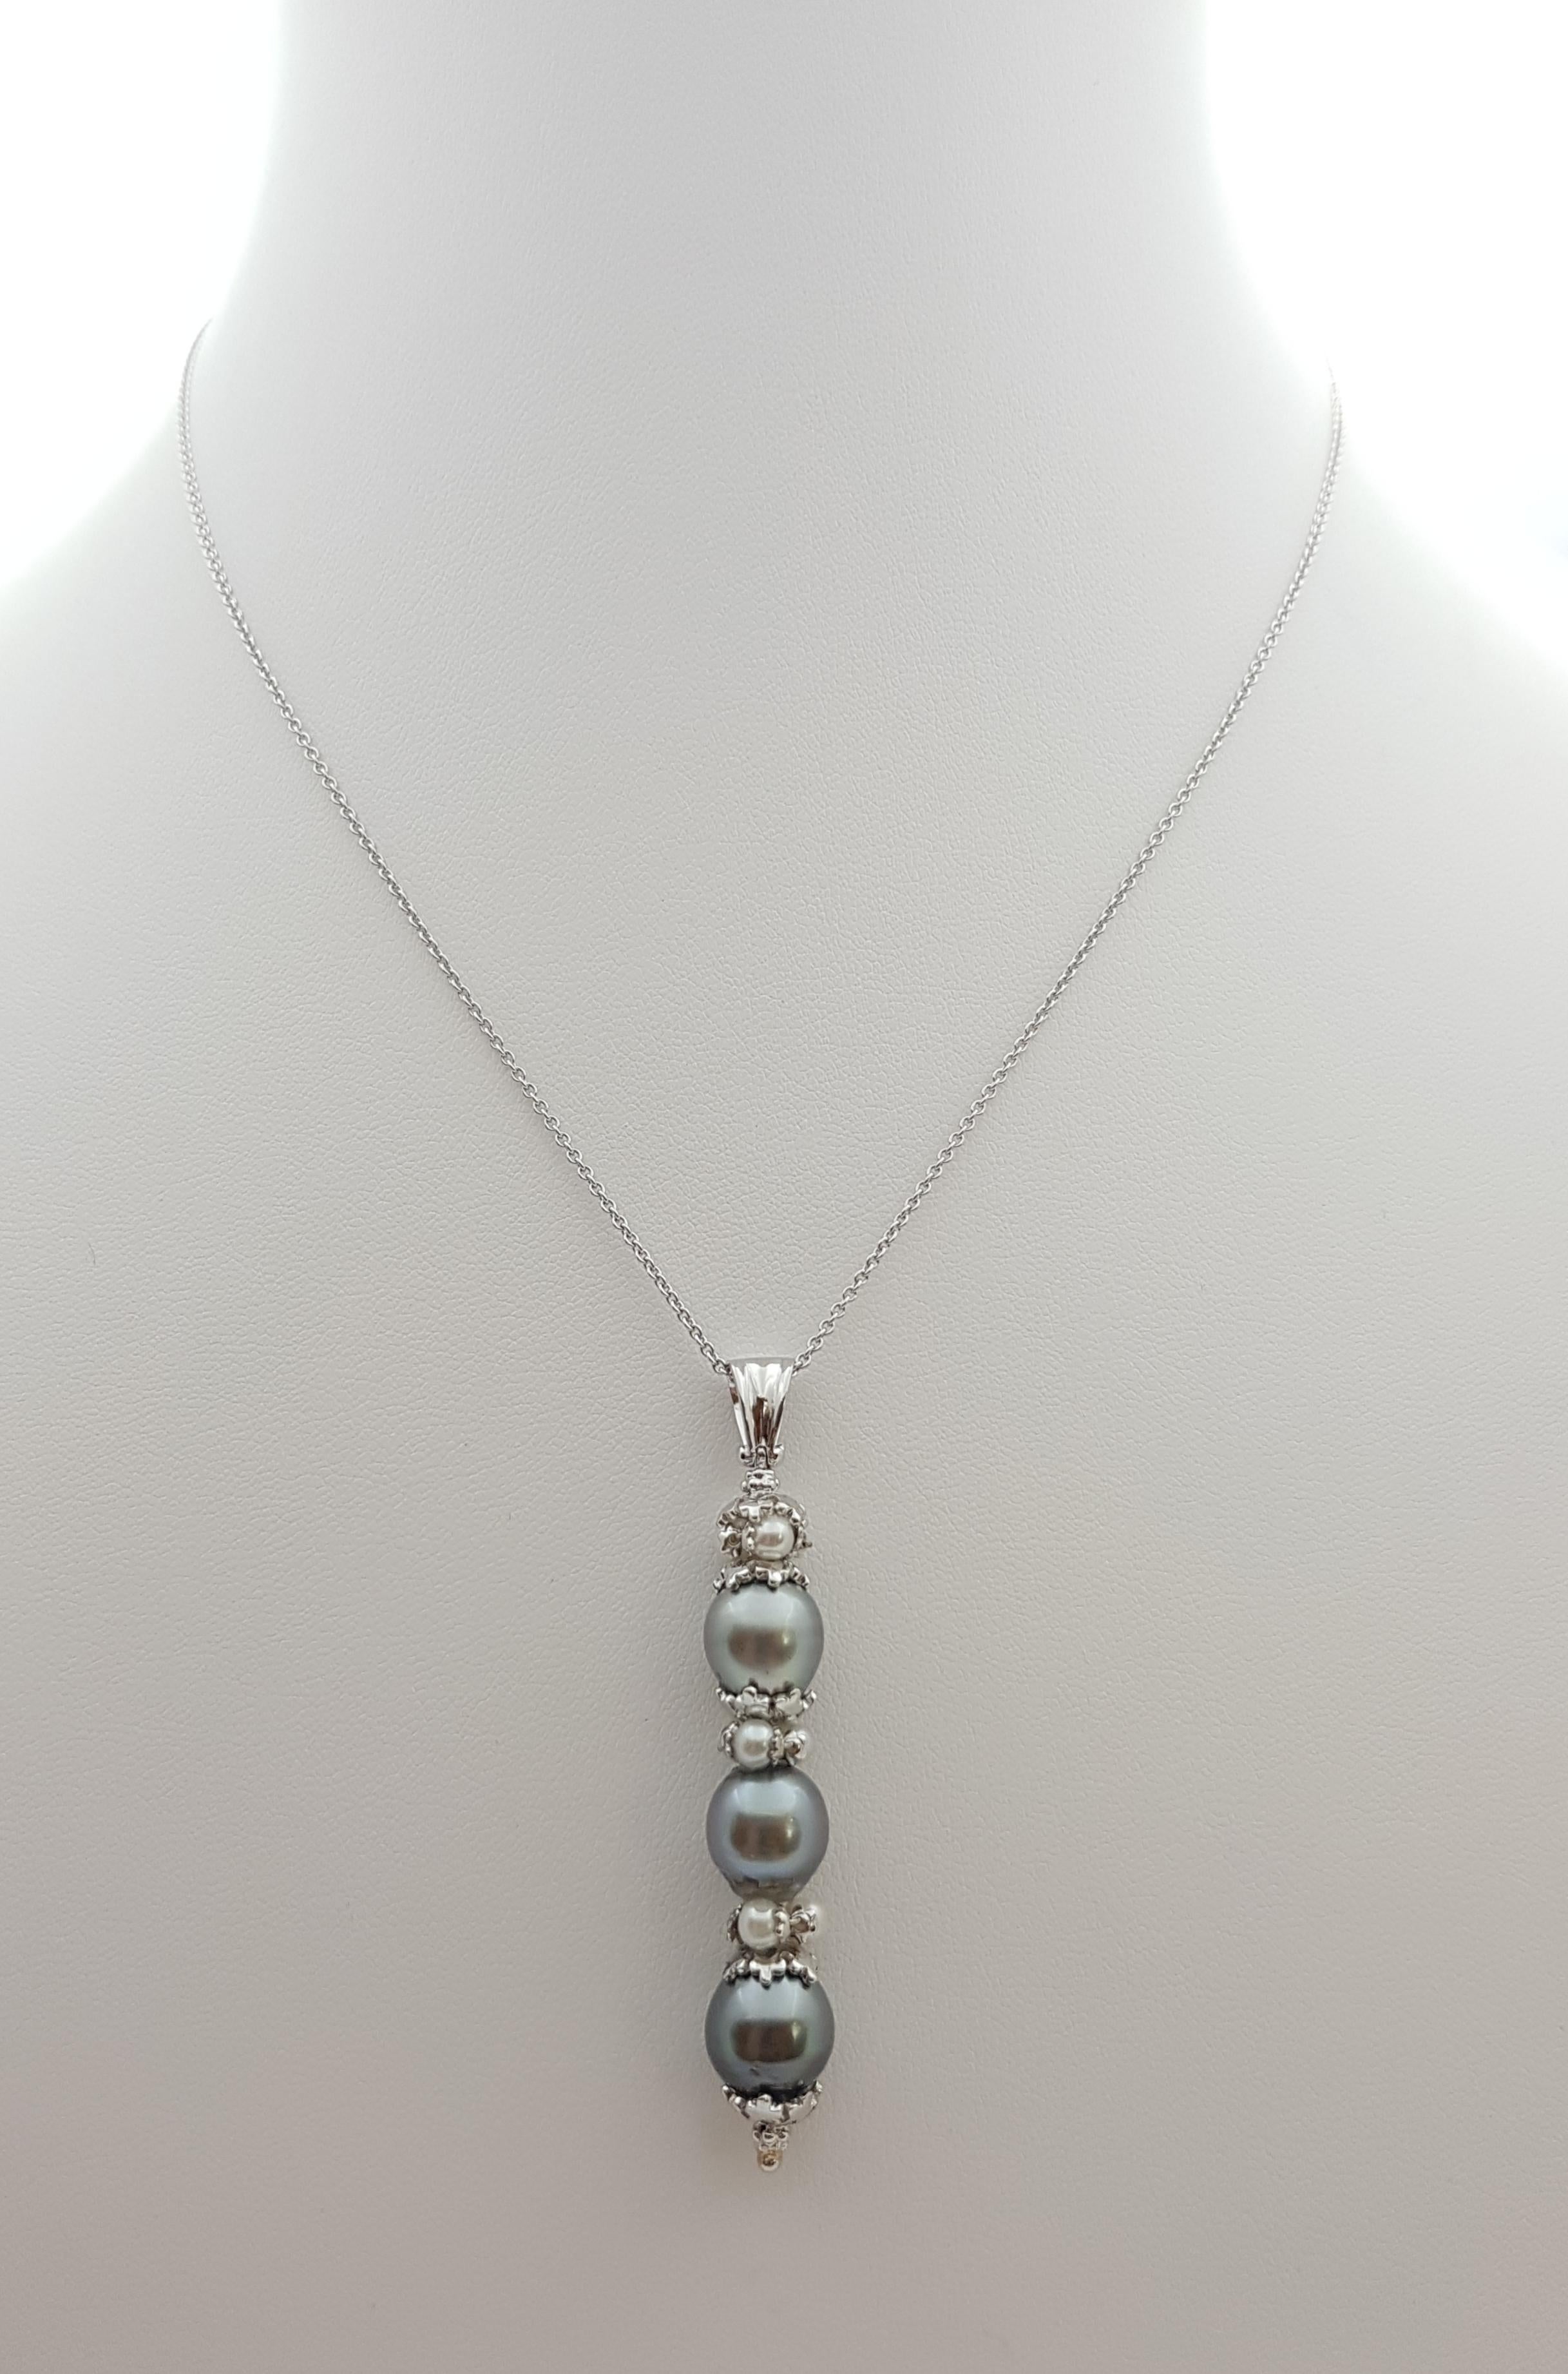 South Sea Pearl with Fresh Water Pearl Pendant set in 18 Karat White Gold Settings
(chain not included)

Width: 0.9 cm 
Length: 6.0  cm
Total Weight: 9.44 grams

